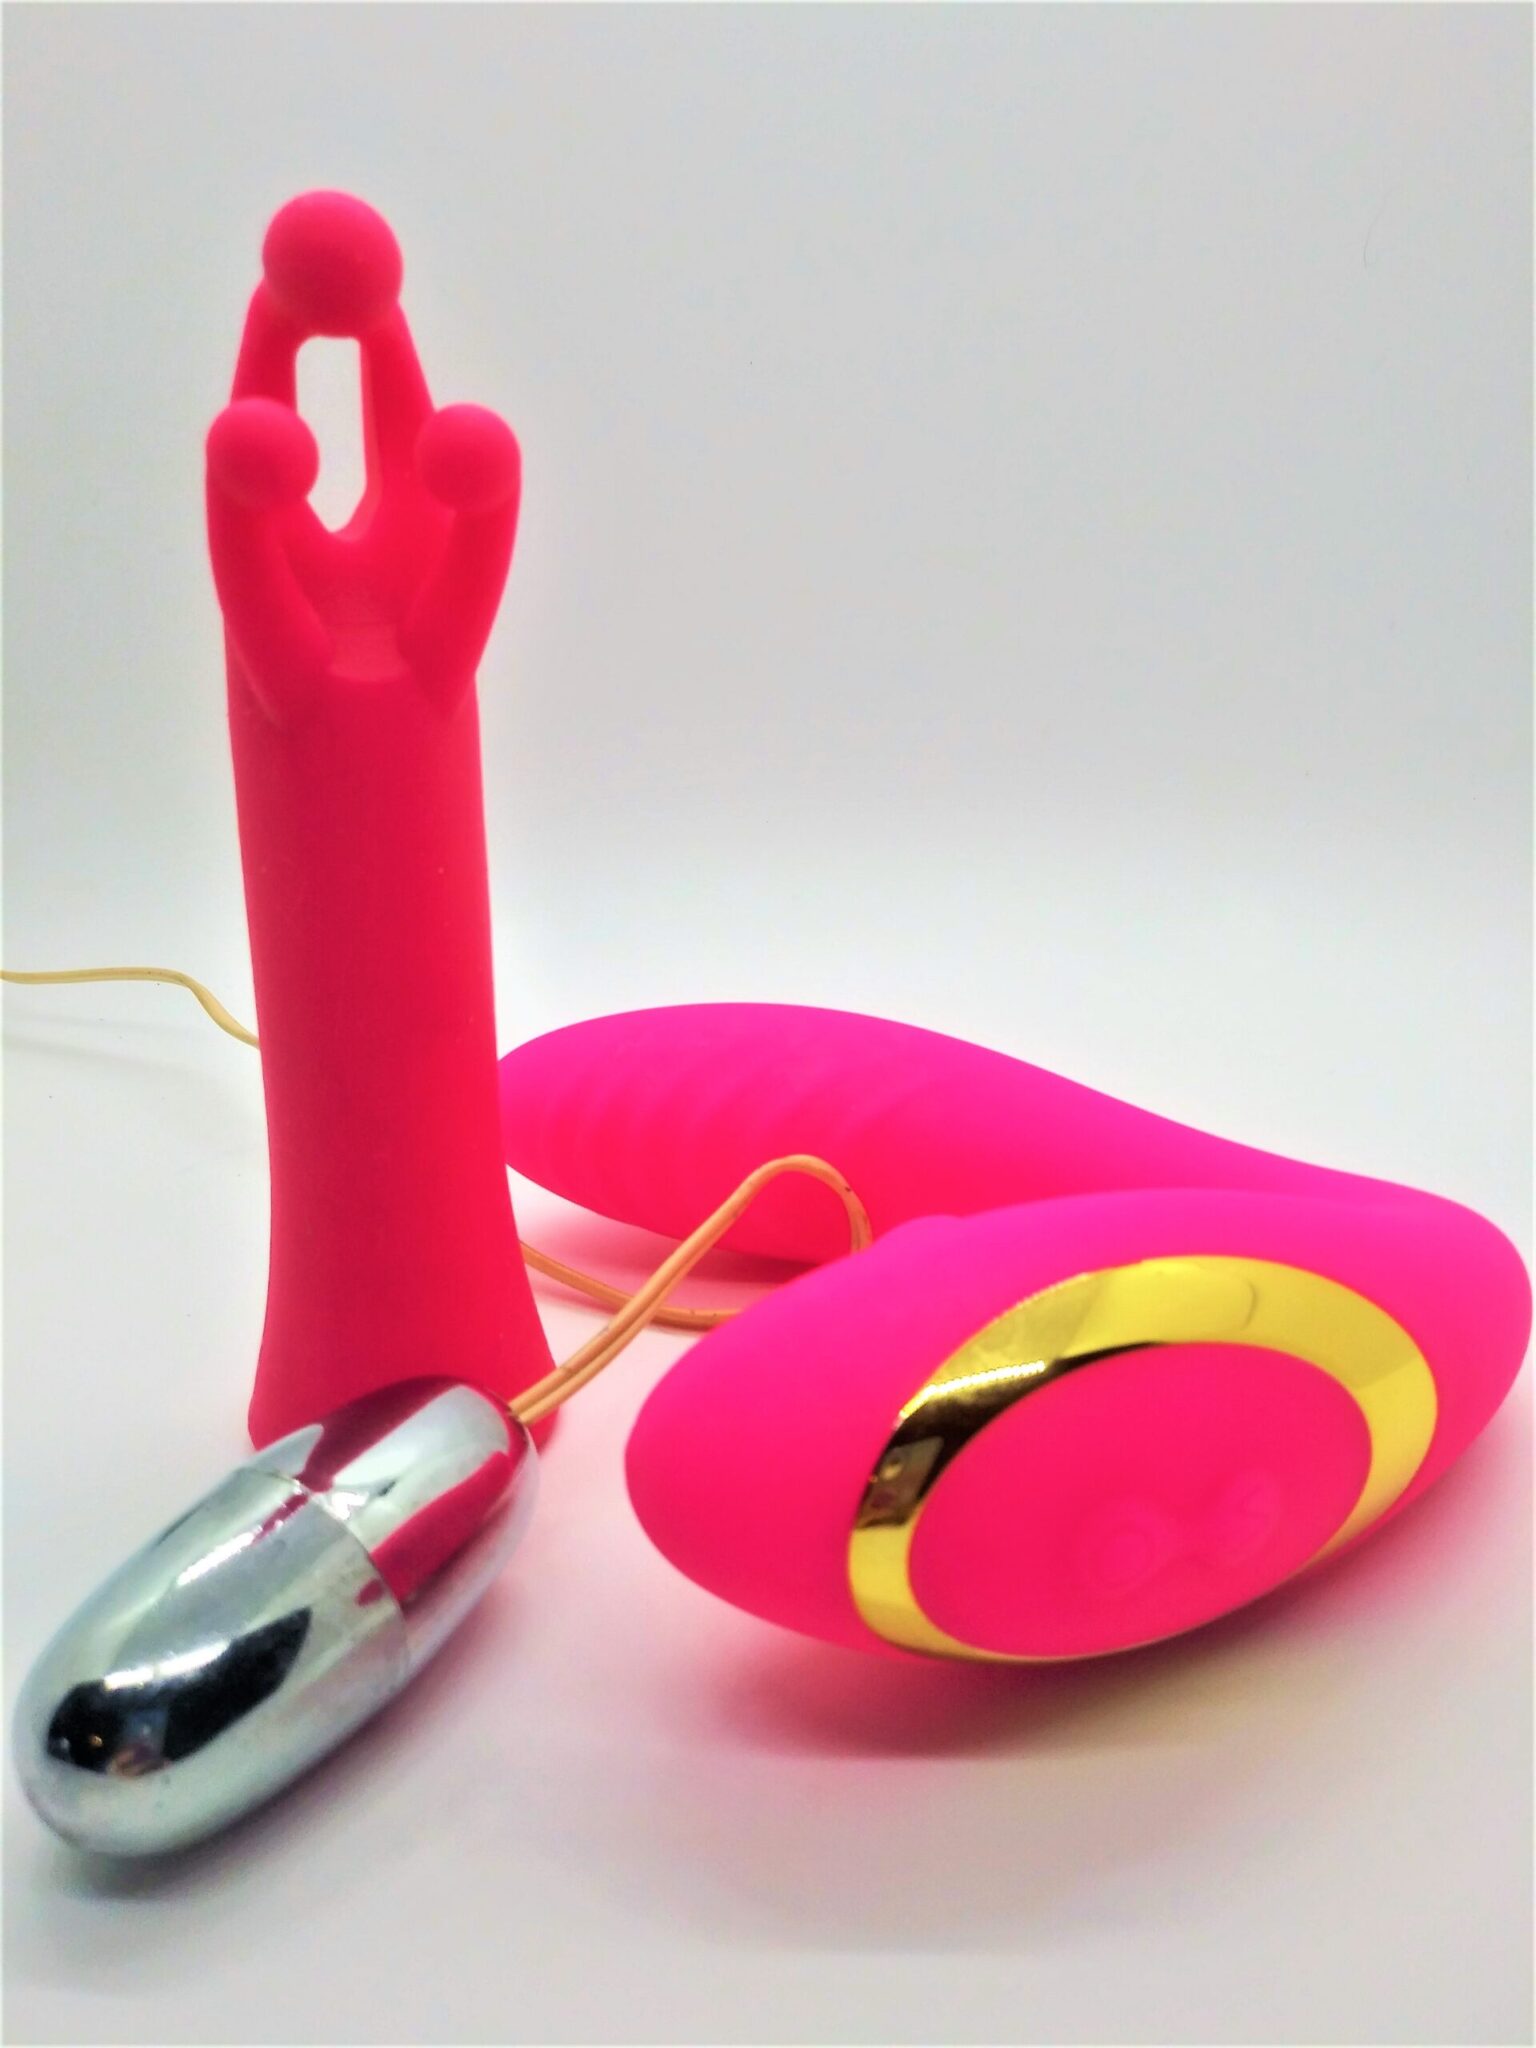 Should You Buy a Vibrator for Your Wife? 5 Great Reasons Why You Should and Shouldnt Bedbible